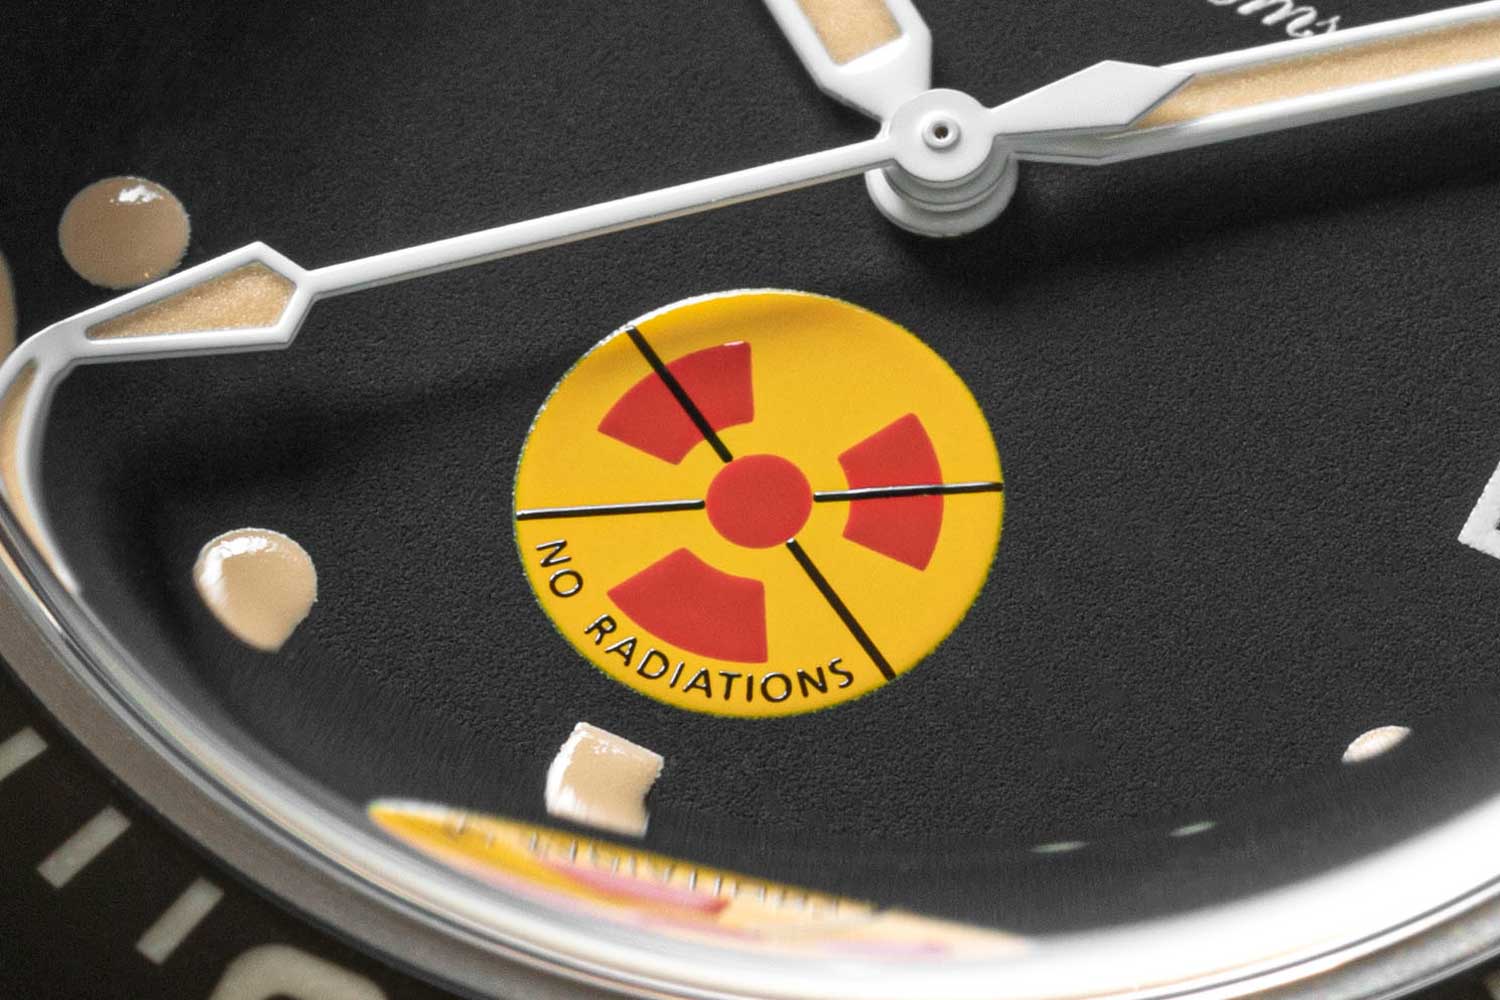 Used as a diving instrument by the German Navy’s combat swimmers in the mid 1960s, the Blancpain Fifty Fathoms was stamped with a "no radiations" logo indicating that the brand was not using luminescent materials composed of radium. (©Revolution)